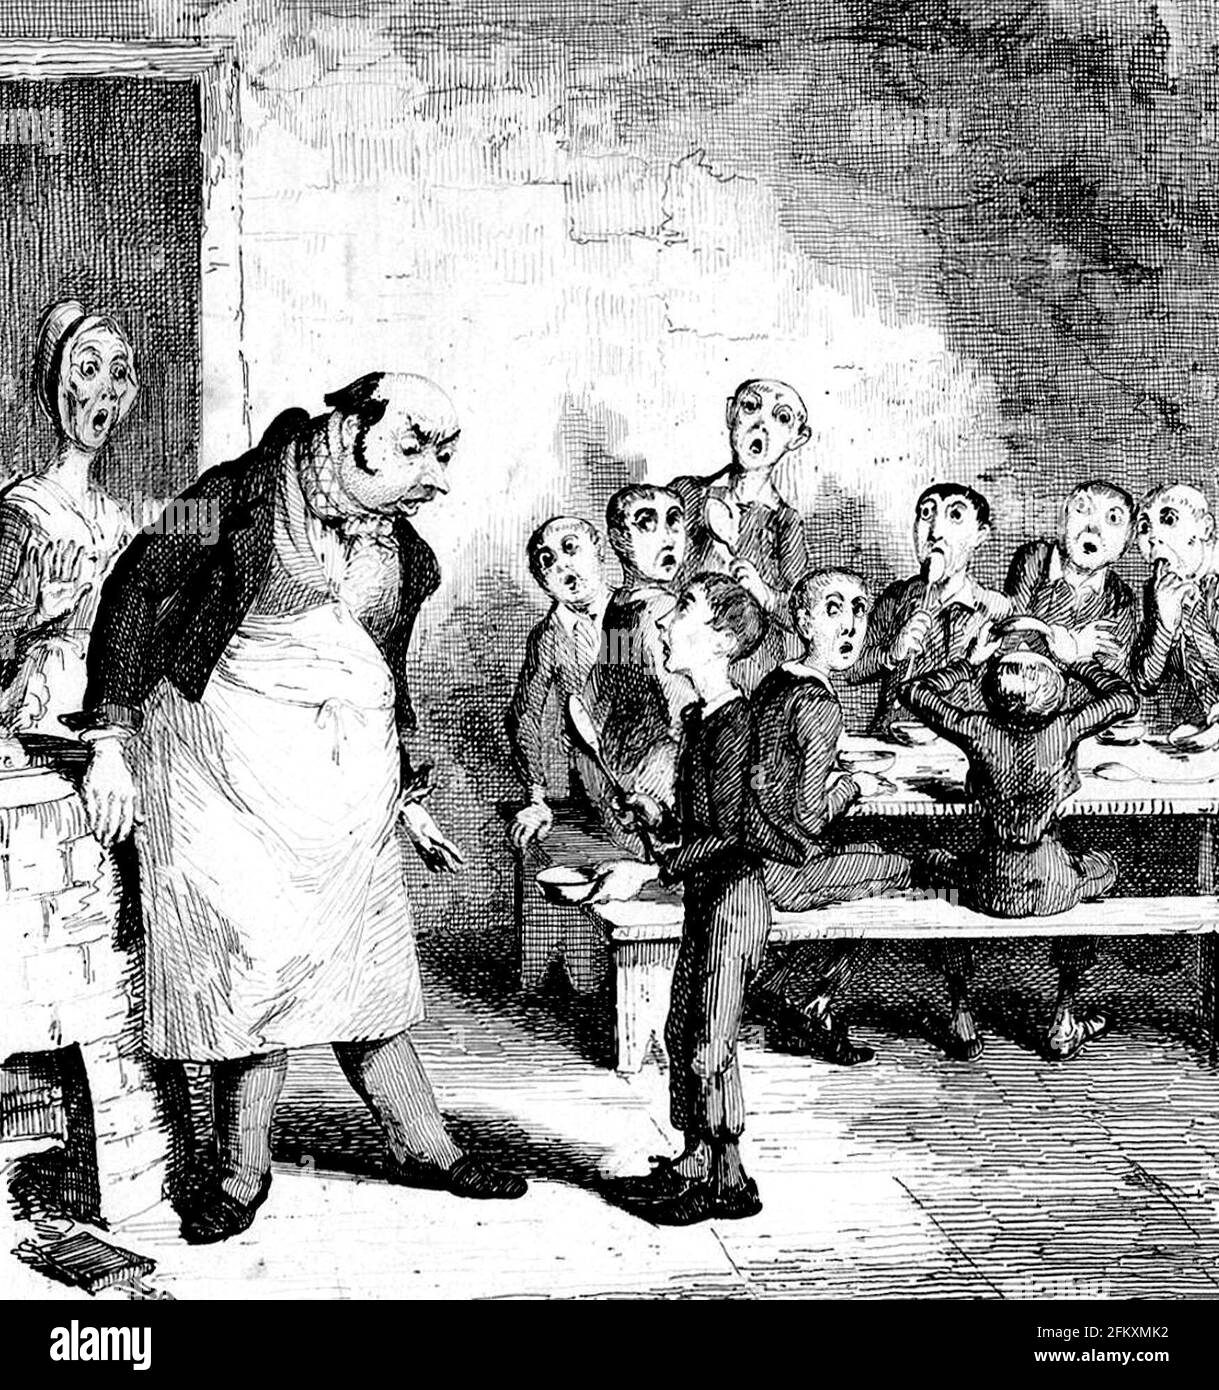 Oliver Twist. Illustration from the frontispiece to a first edition of  Charles Dickens' "Oliver Twist", George Cruikshank, 1838 Stock Photo - Alamy